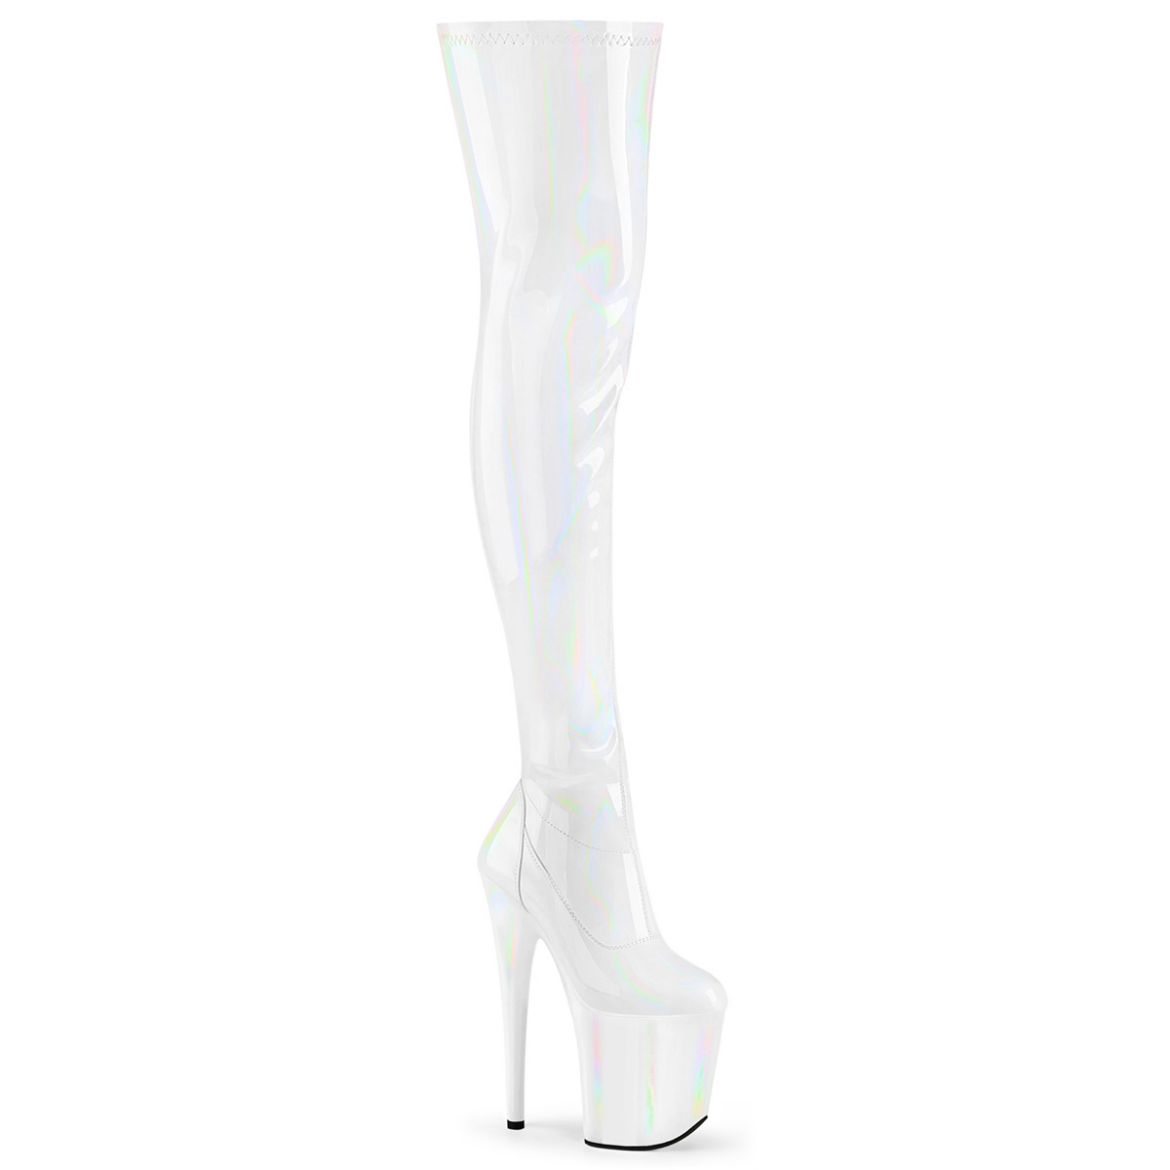 Product image of Pleaser FLAMINGO-3000HWR Wht Str. Holo/Wht Holo 8 Inch Heel 4 Inch PF Stretch Thigh Boot Side Zip